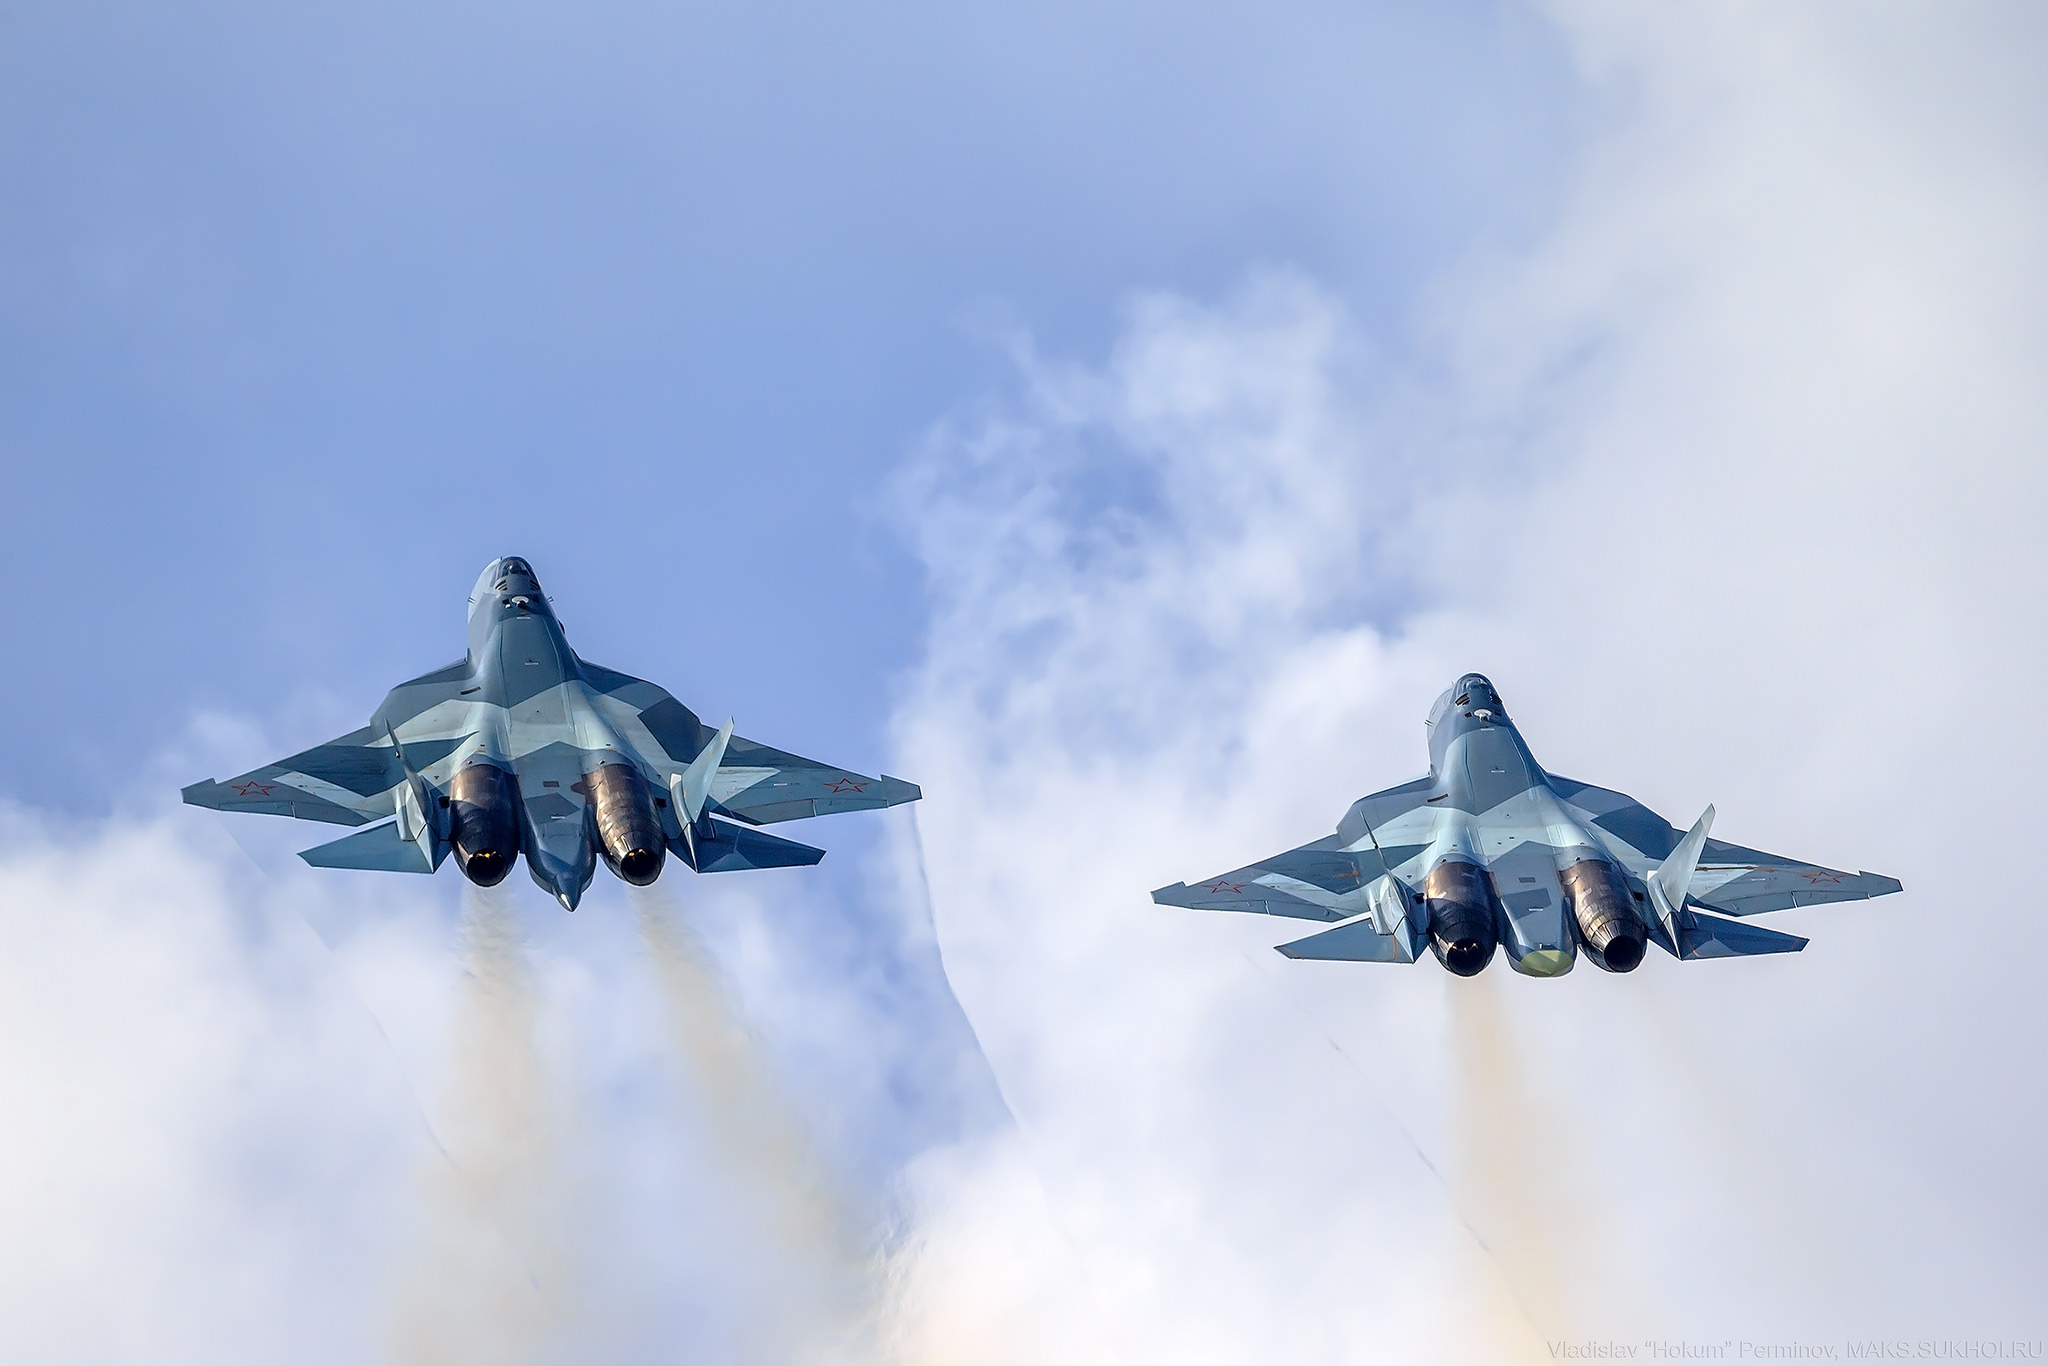 General 2048x1366 military aircraft jet fighter military vehicle aircraft military Sukhoi Russian/Soviet aircraft sky clouds Sukhoi Su-57 flying Russian Air Force